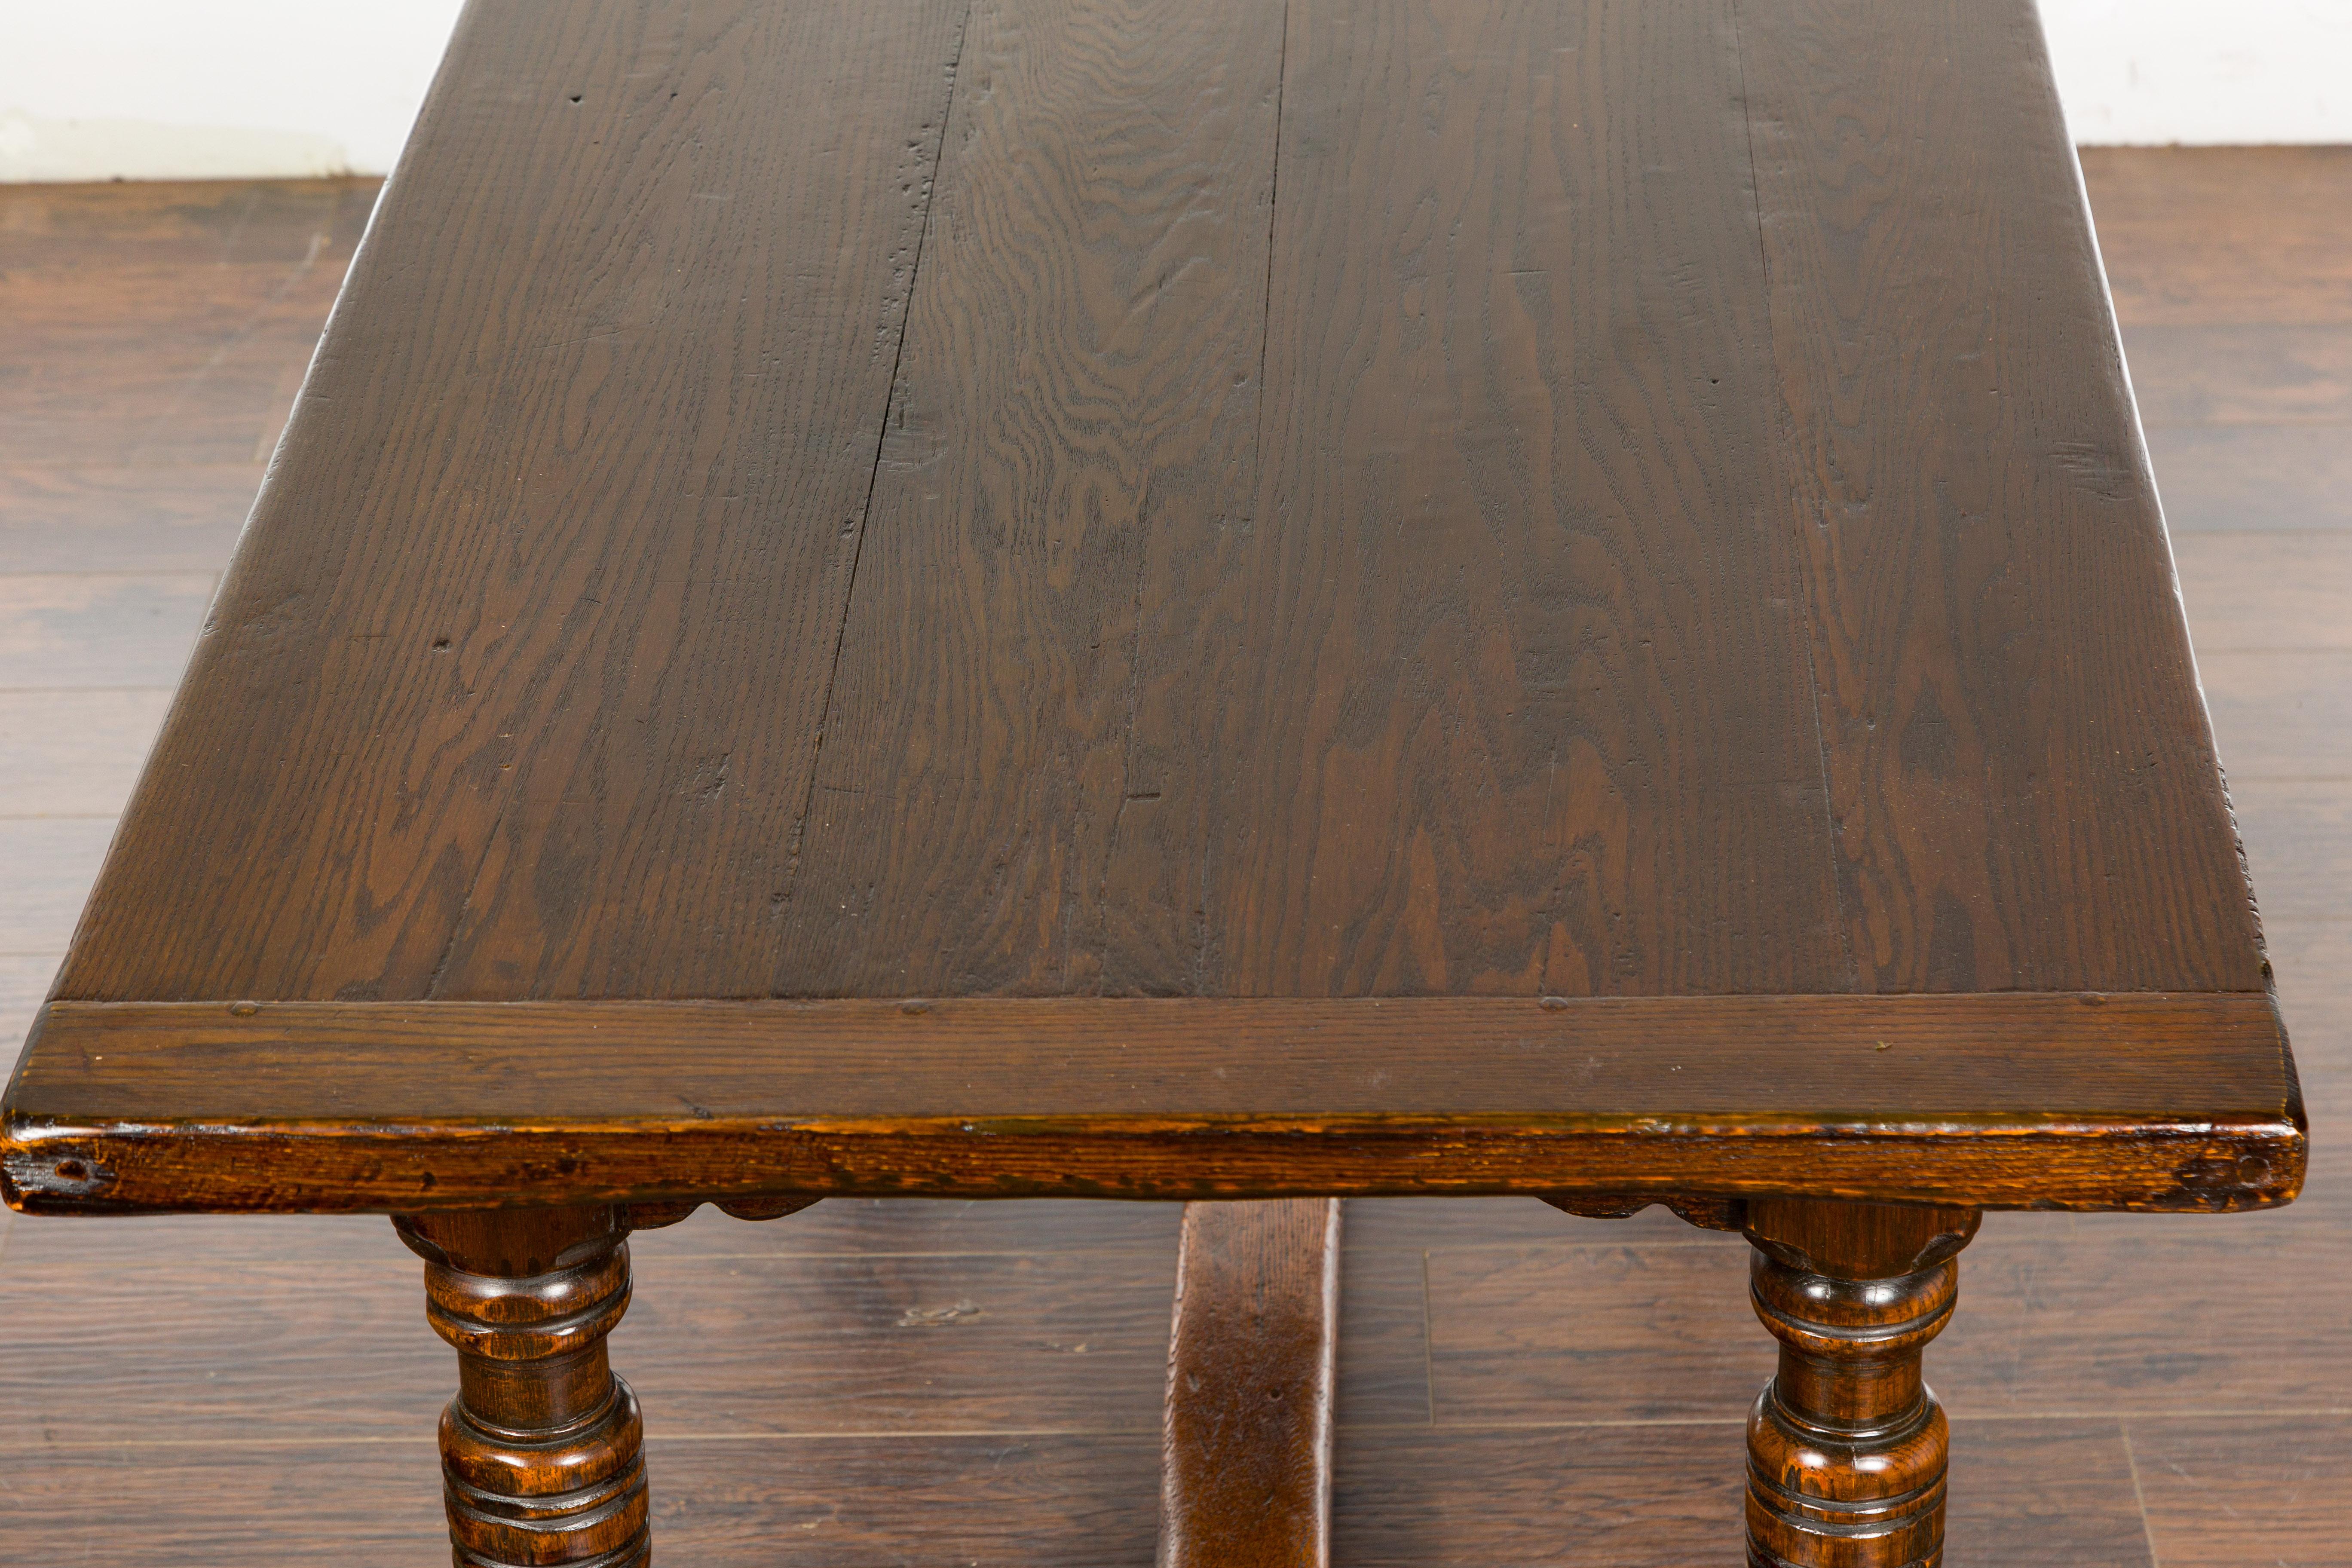 19th Century English Oak Table with Carved Apron and Turned Legs For Sale 14